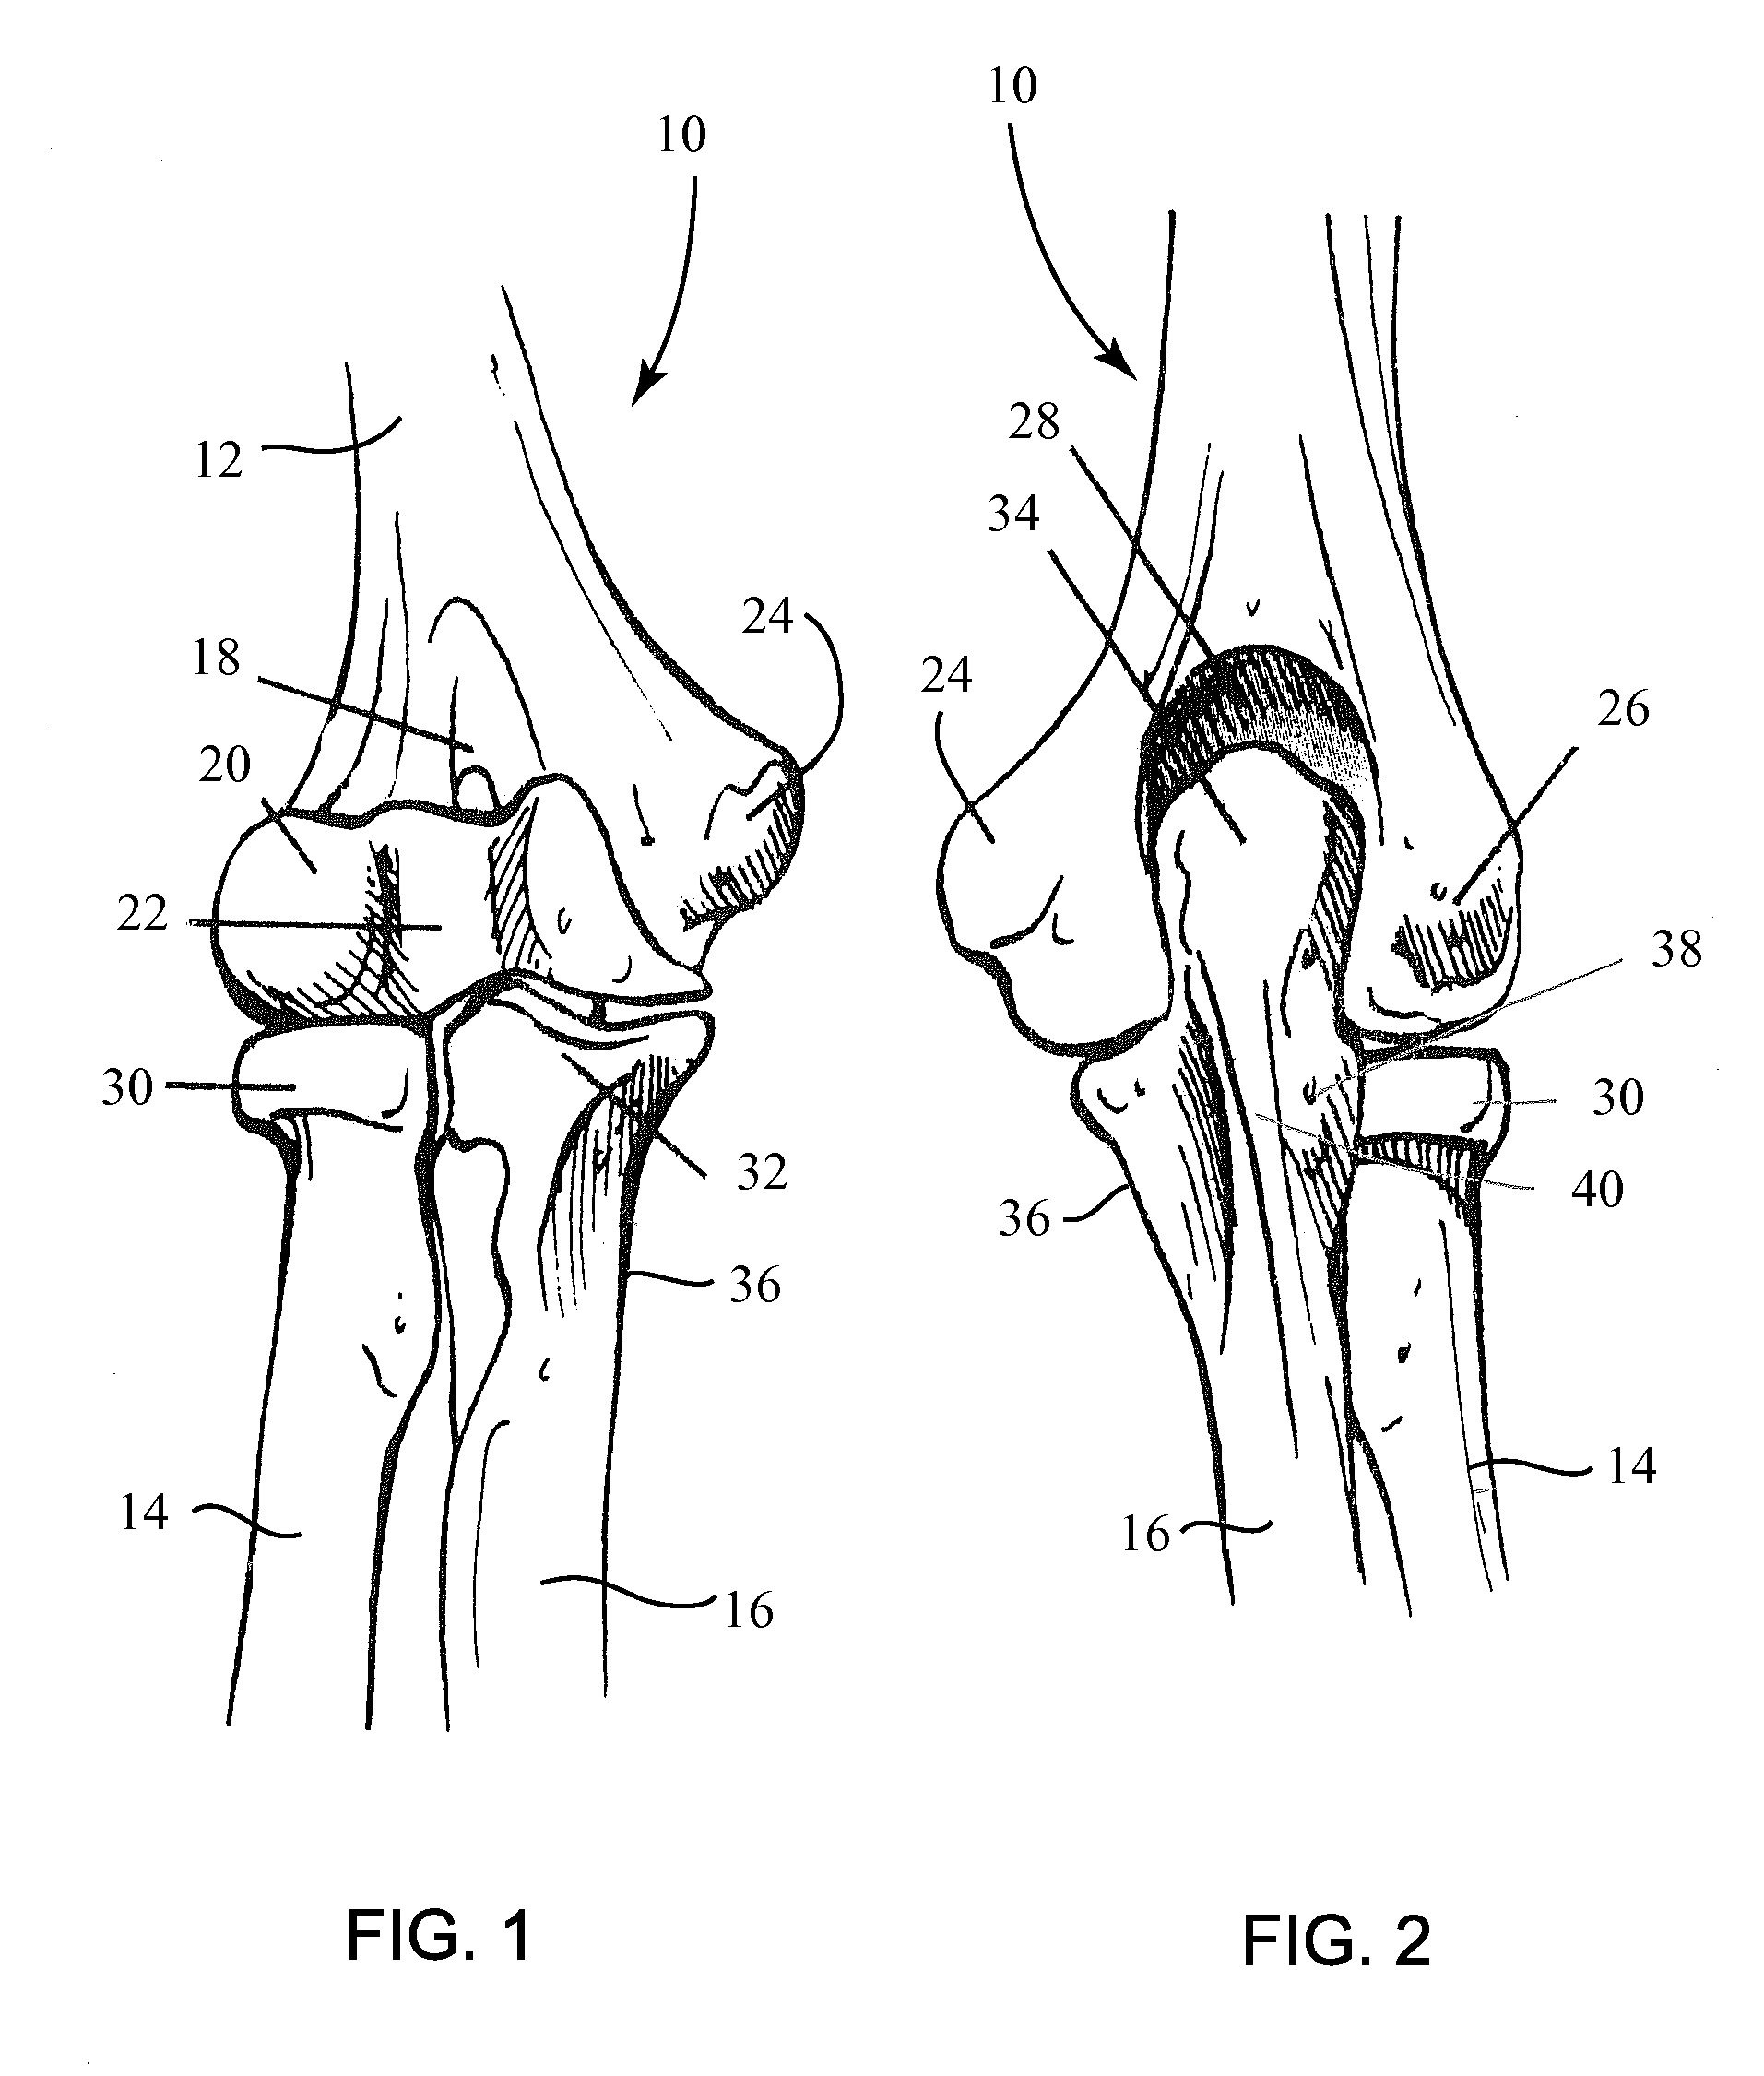 Fracture Fixation Plates for the Distal Humerus